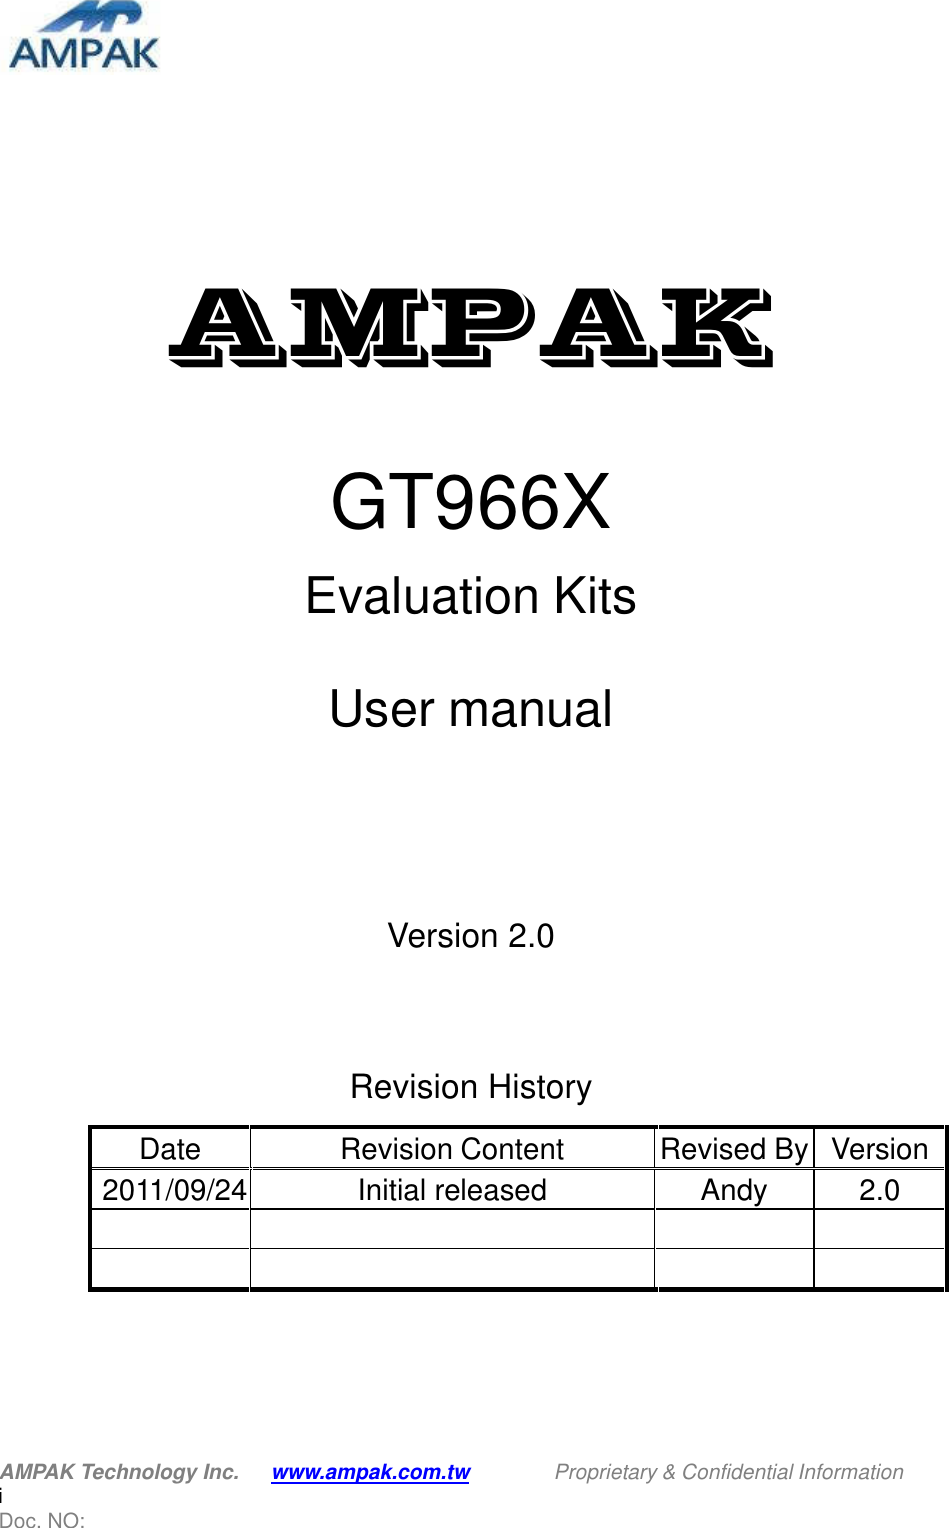 AMPAK Technology Inc.    www.ampak.com.tw    Proprietary &amp; Confidential Information i Doc. NO:          AMPAK  GT966X Evaluation Kits  User manual   Version 2.0     Revision History Date  Revision Content  Revised By Version 2011/09/24 Initial released    Andy  2.0                 